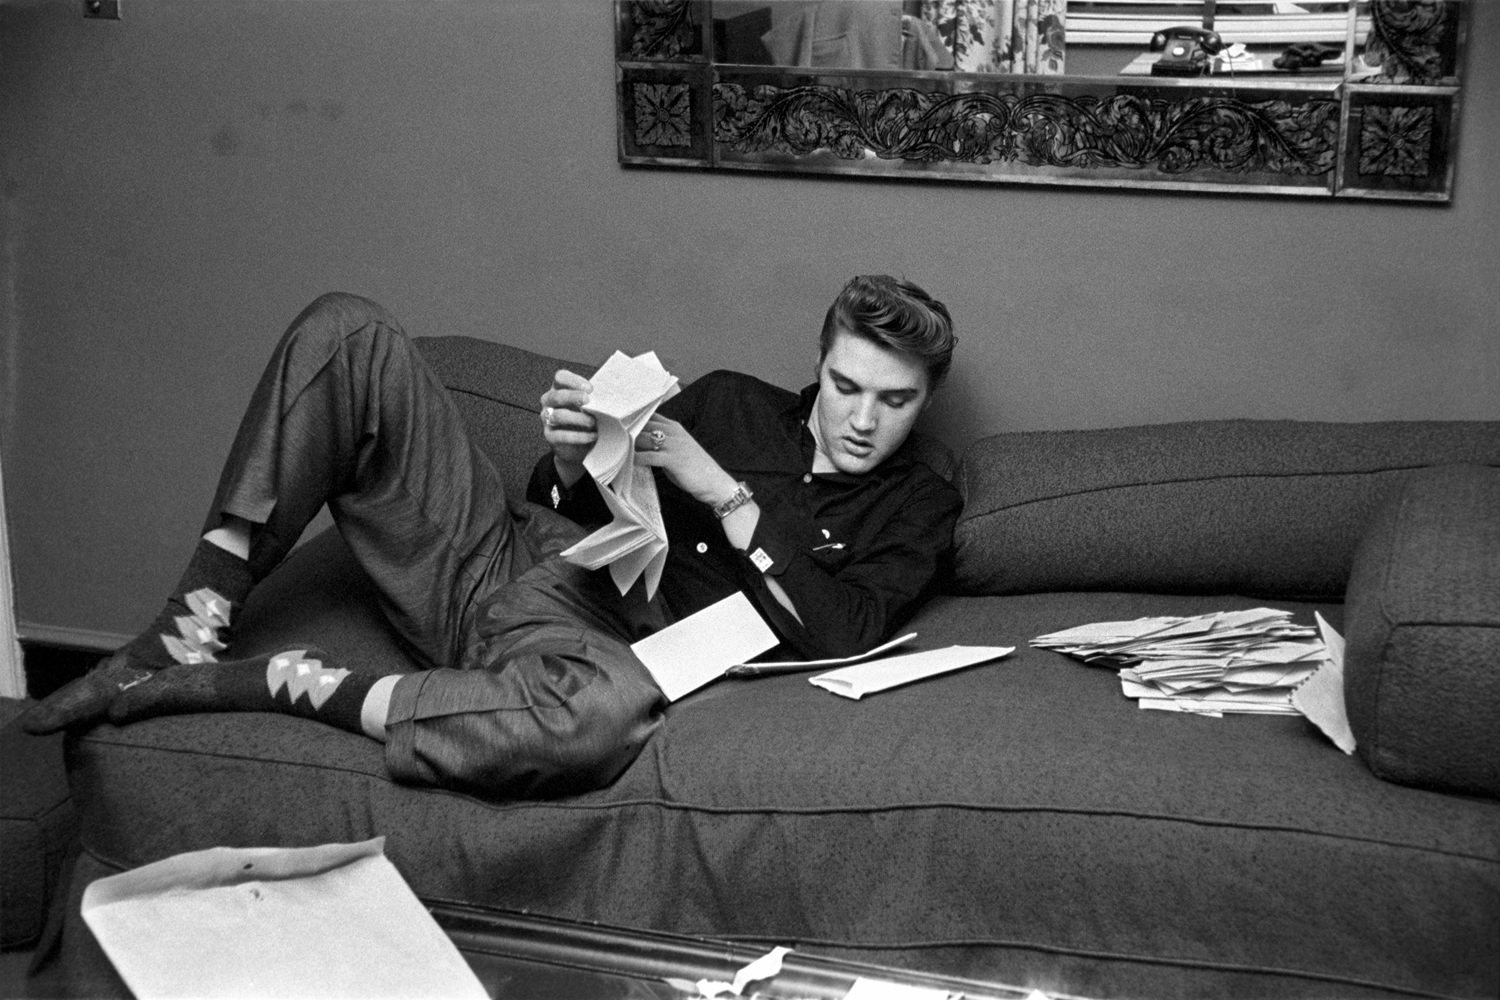 March 17, 1956. The Warwick, New York. We got into his room and there was an envelope on the couch with about a hundred letters from fans inside. He plopped down on the couch, pulled his shoes off (exposing his argyle socks) and proceeded to read some of the fan mail. Some letters were six or seven pages long and he was going to read every page. After he finished reading them, he tore them up, explaining  I don't want anyone else reading my mail and I'm not taking it with me.